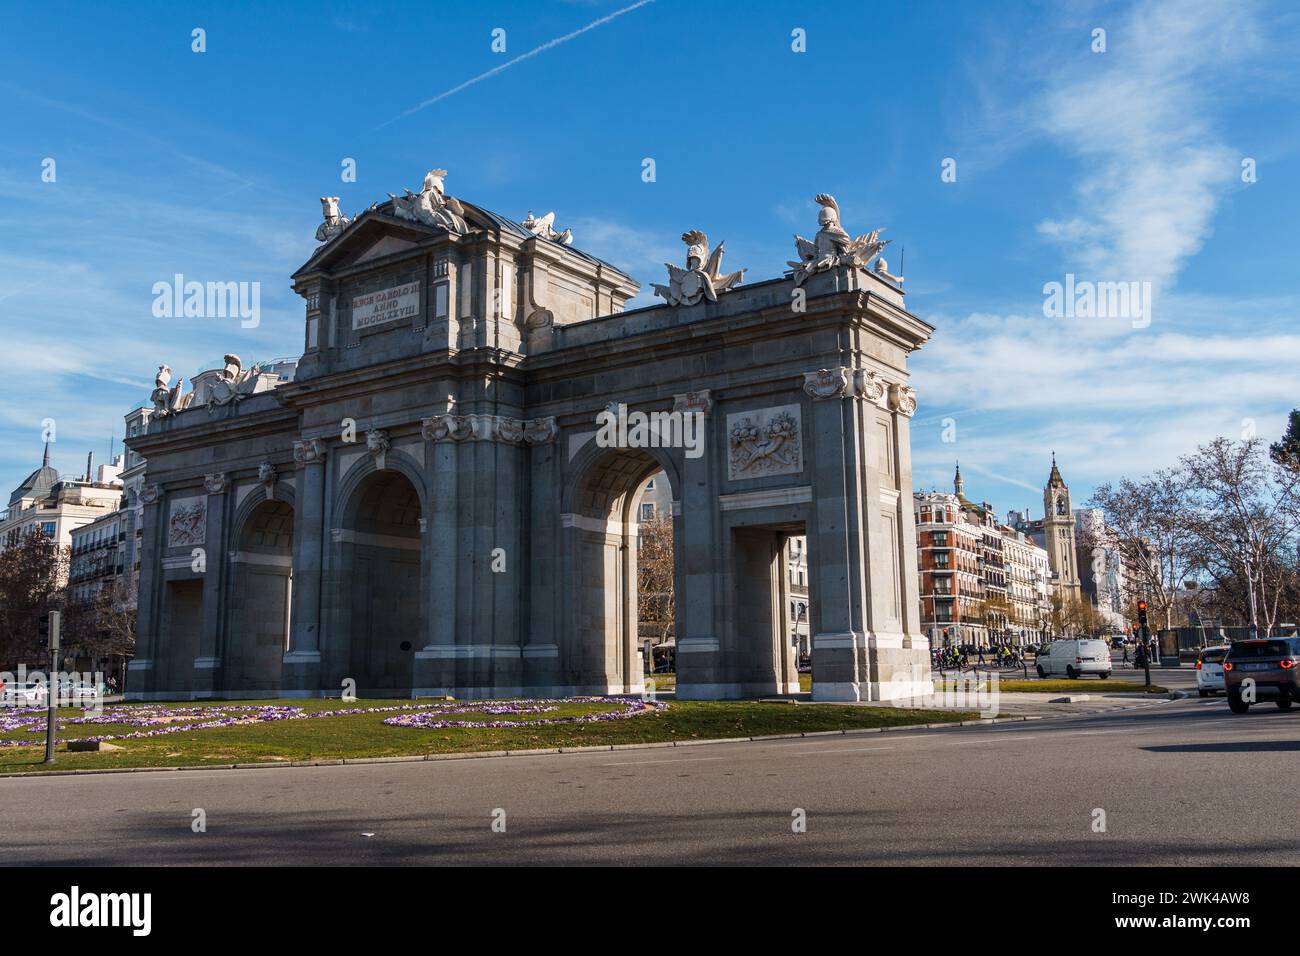 Madrid, Spain - January 28, 2024: The Puerta de Alcala Neo-classical gate in the Plaza de la Independencia. Newly restored iconic monument Stock Photo